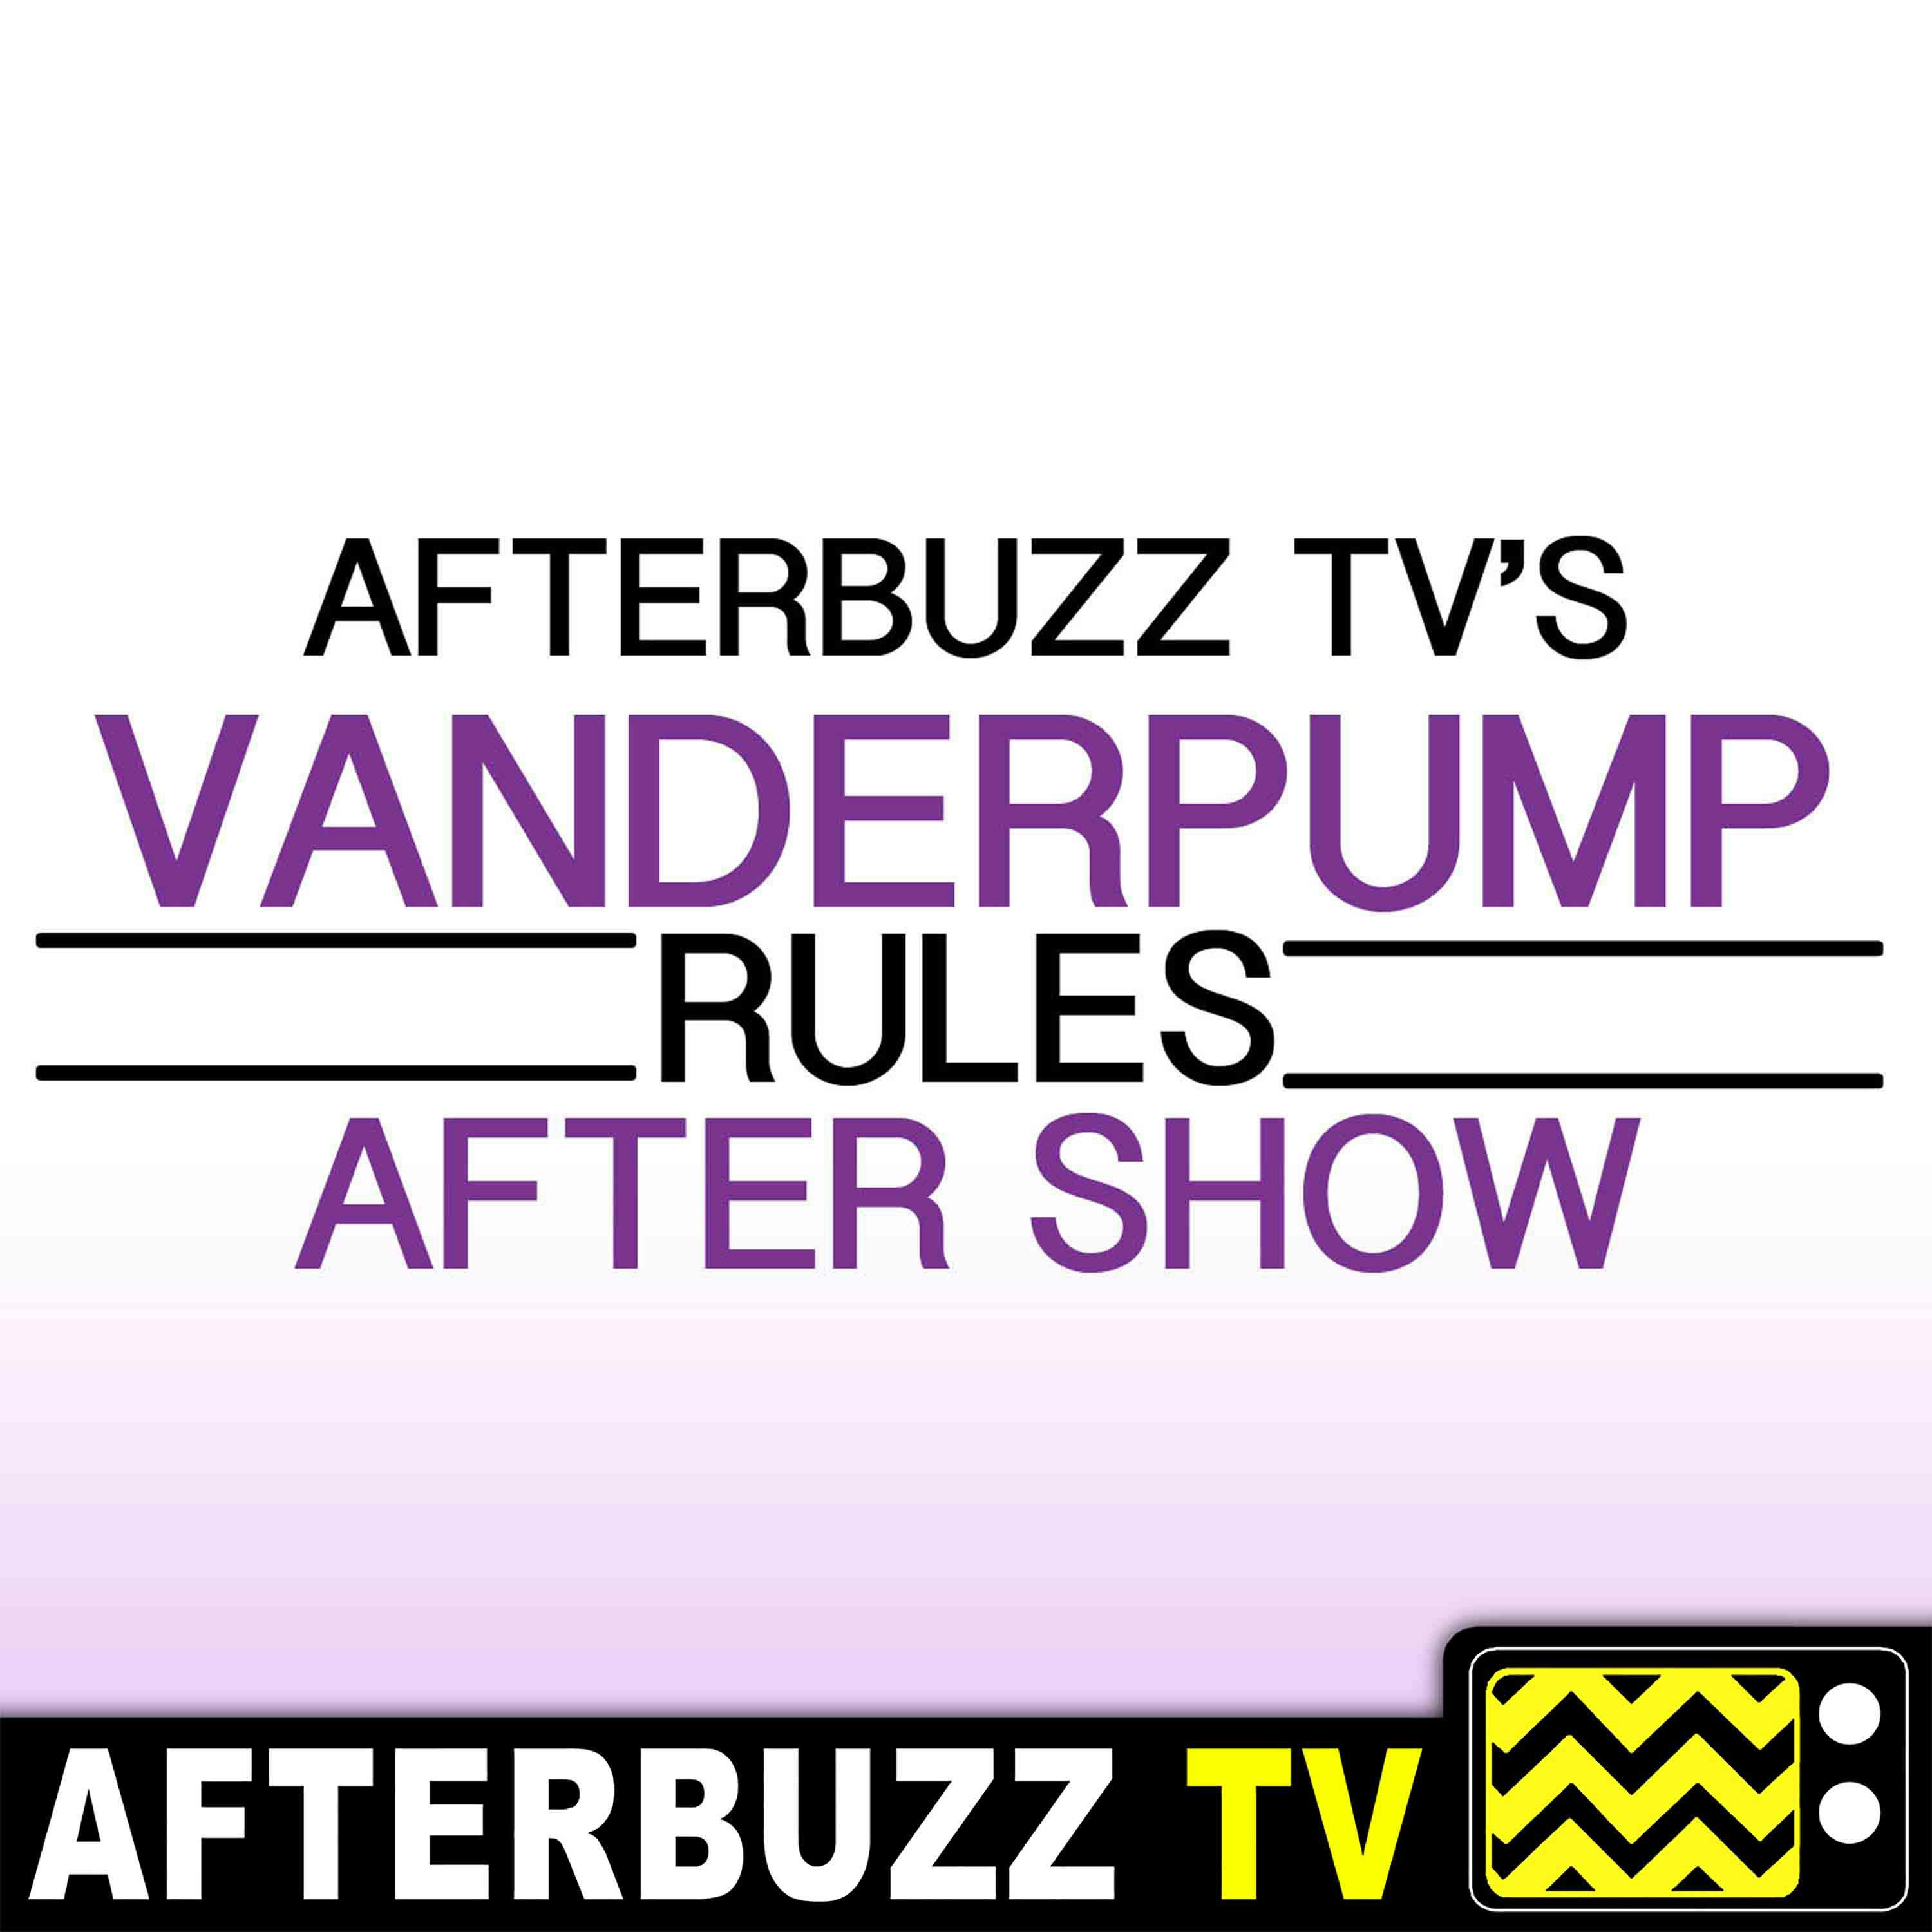 "Brittany And The Beast" Season 7 Episode 20 'Vanderpump Rules' Review